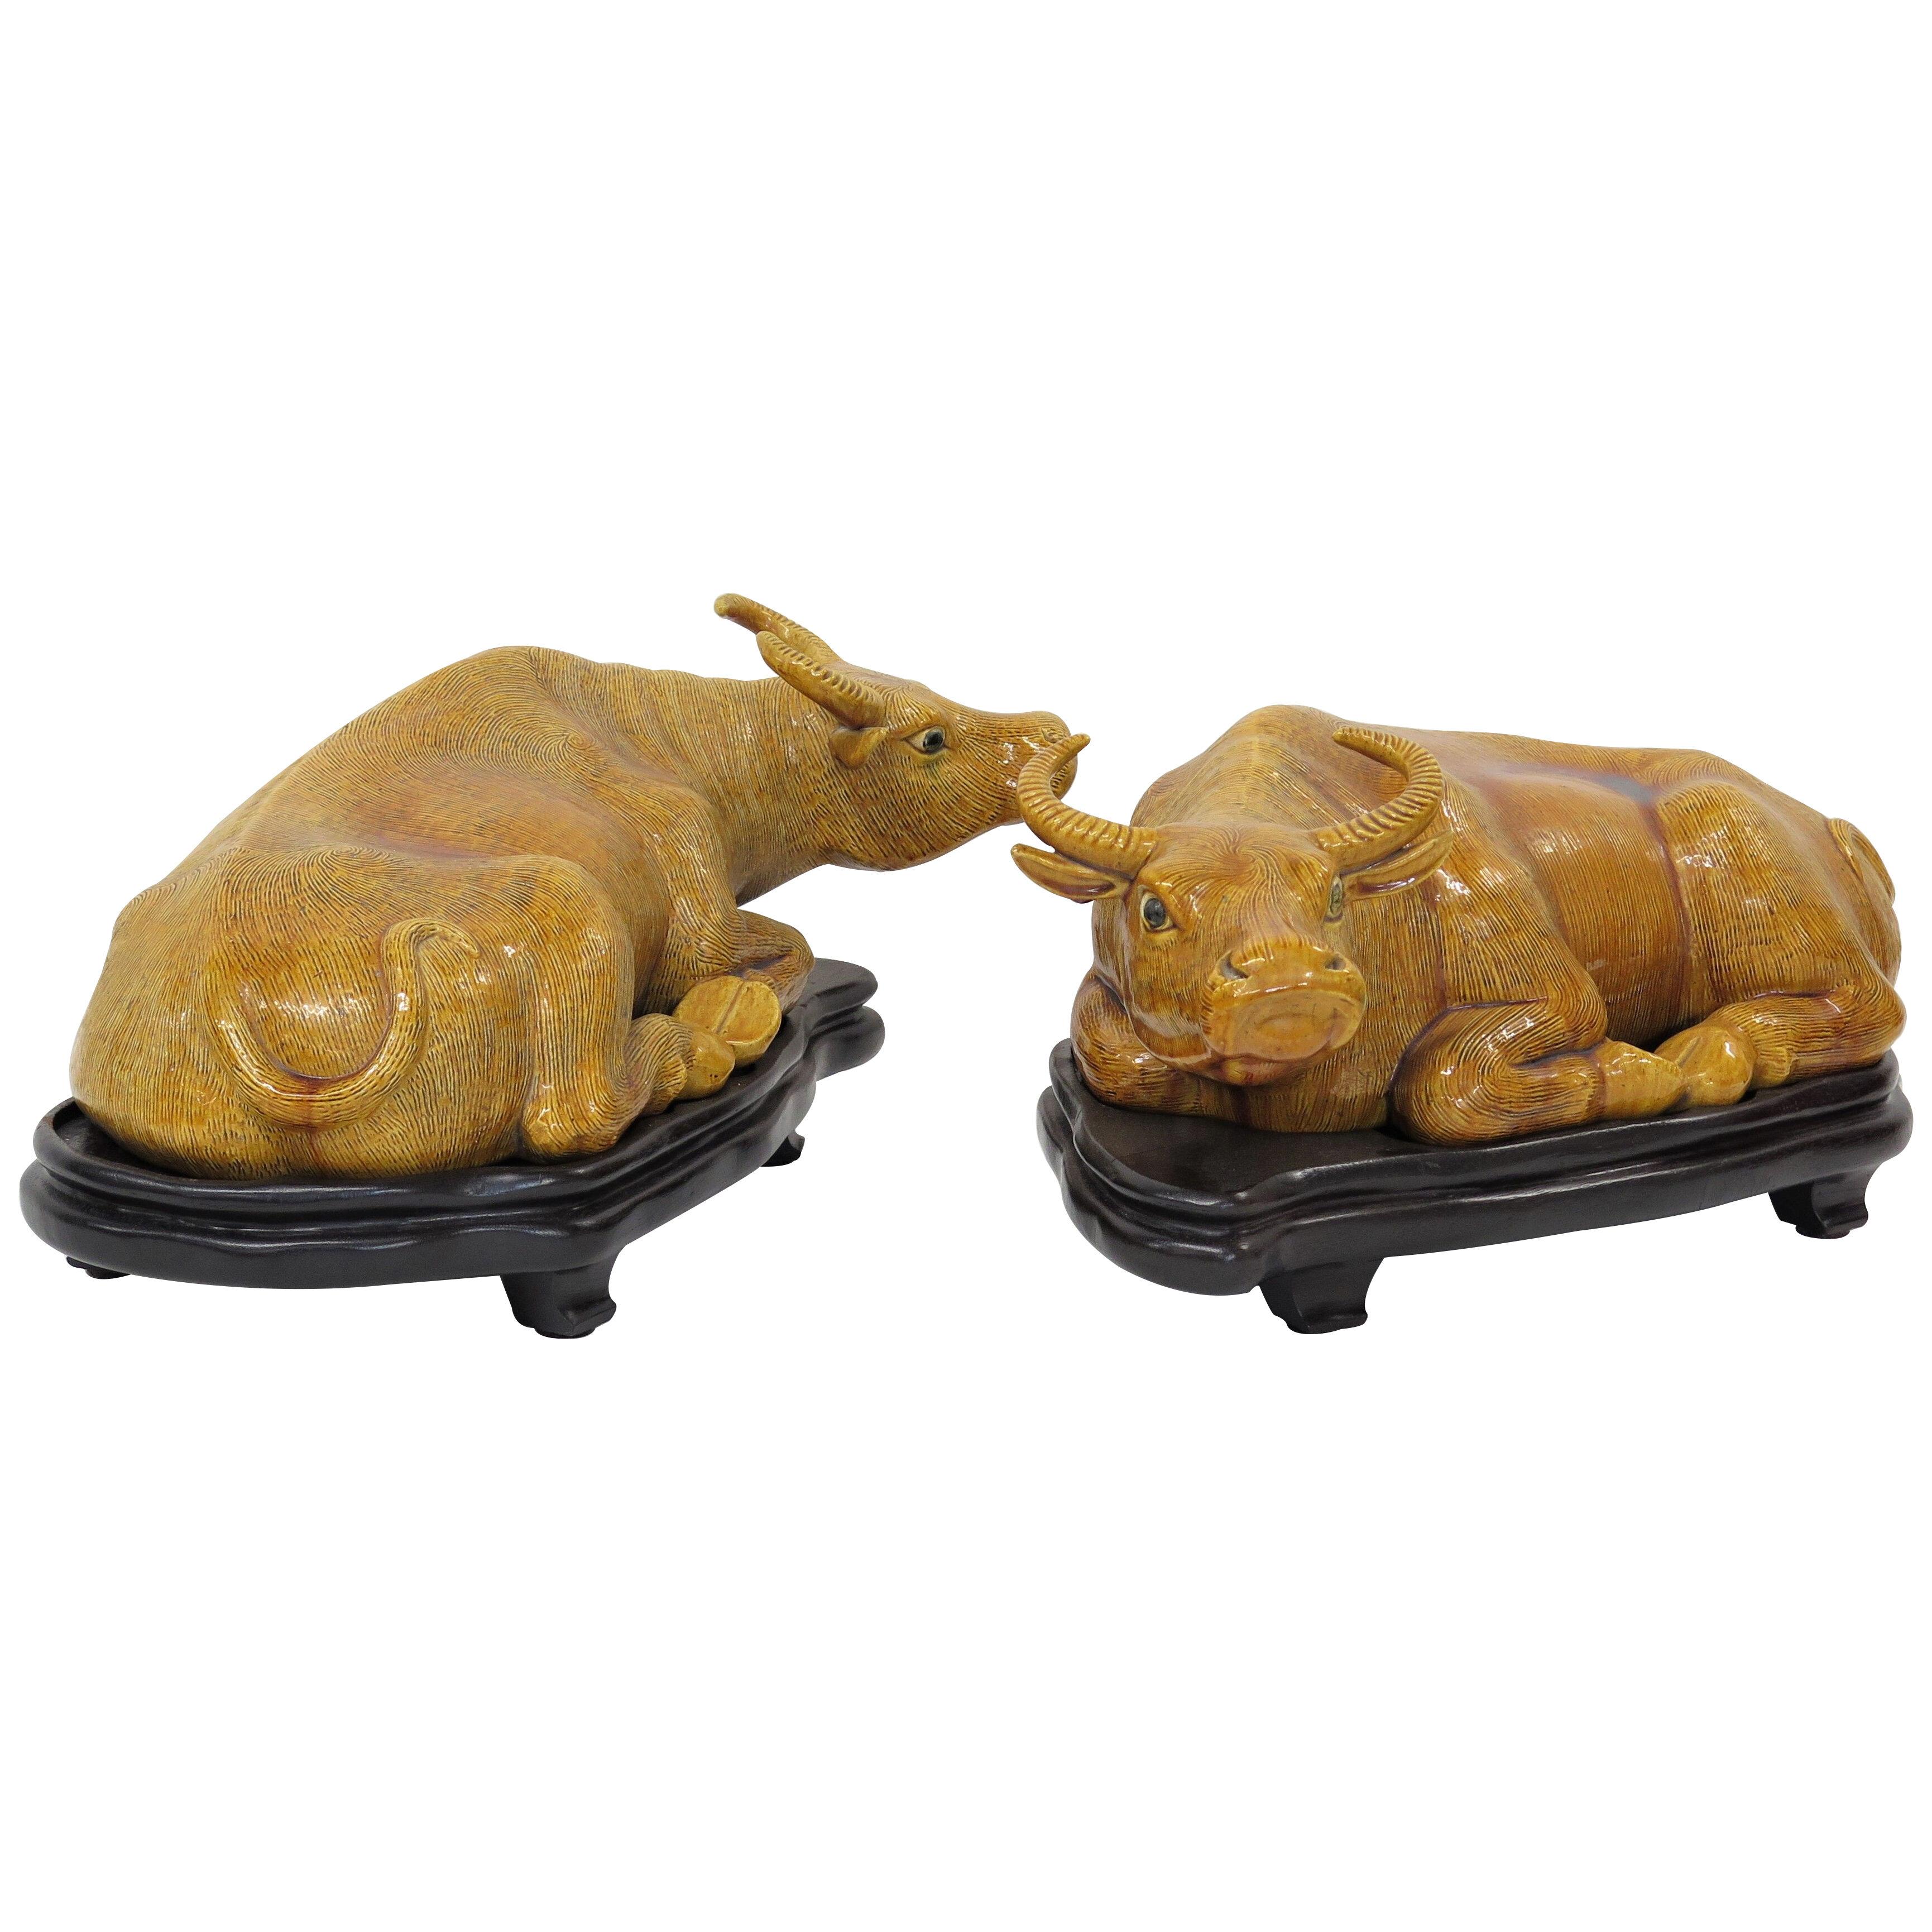 Chinese Ochre Glazed Recumbent Oxen on Carved Wooden Stands